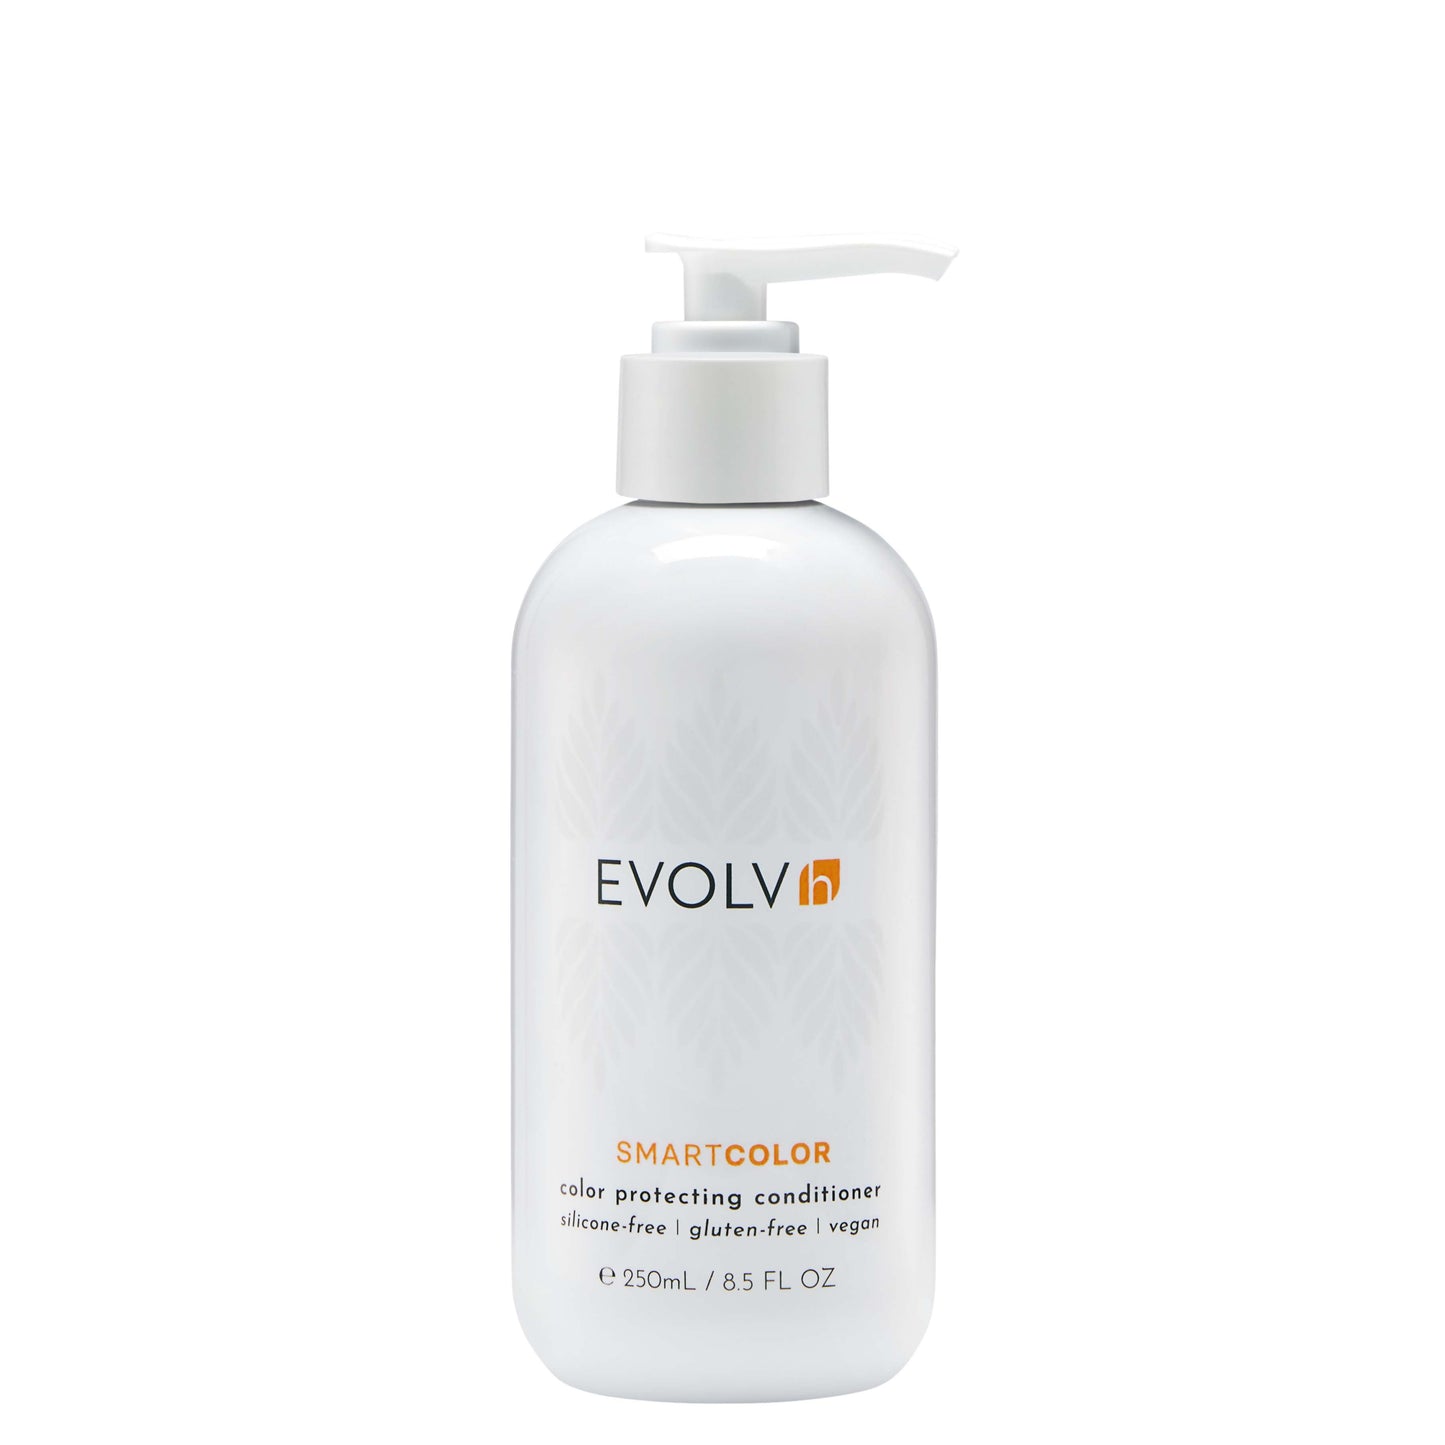 EVOLVH SmartColor Protection Conditioner full size